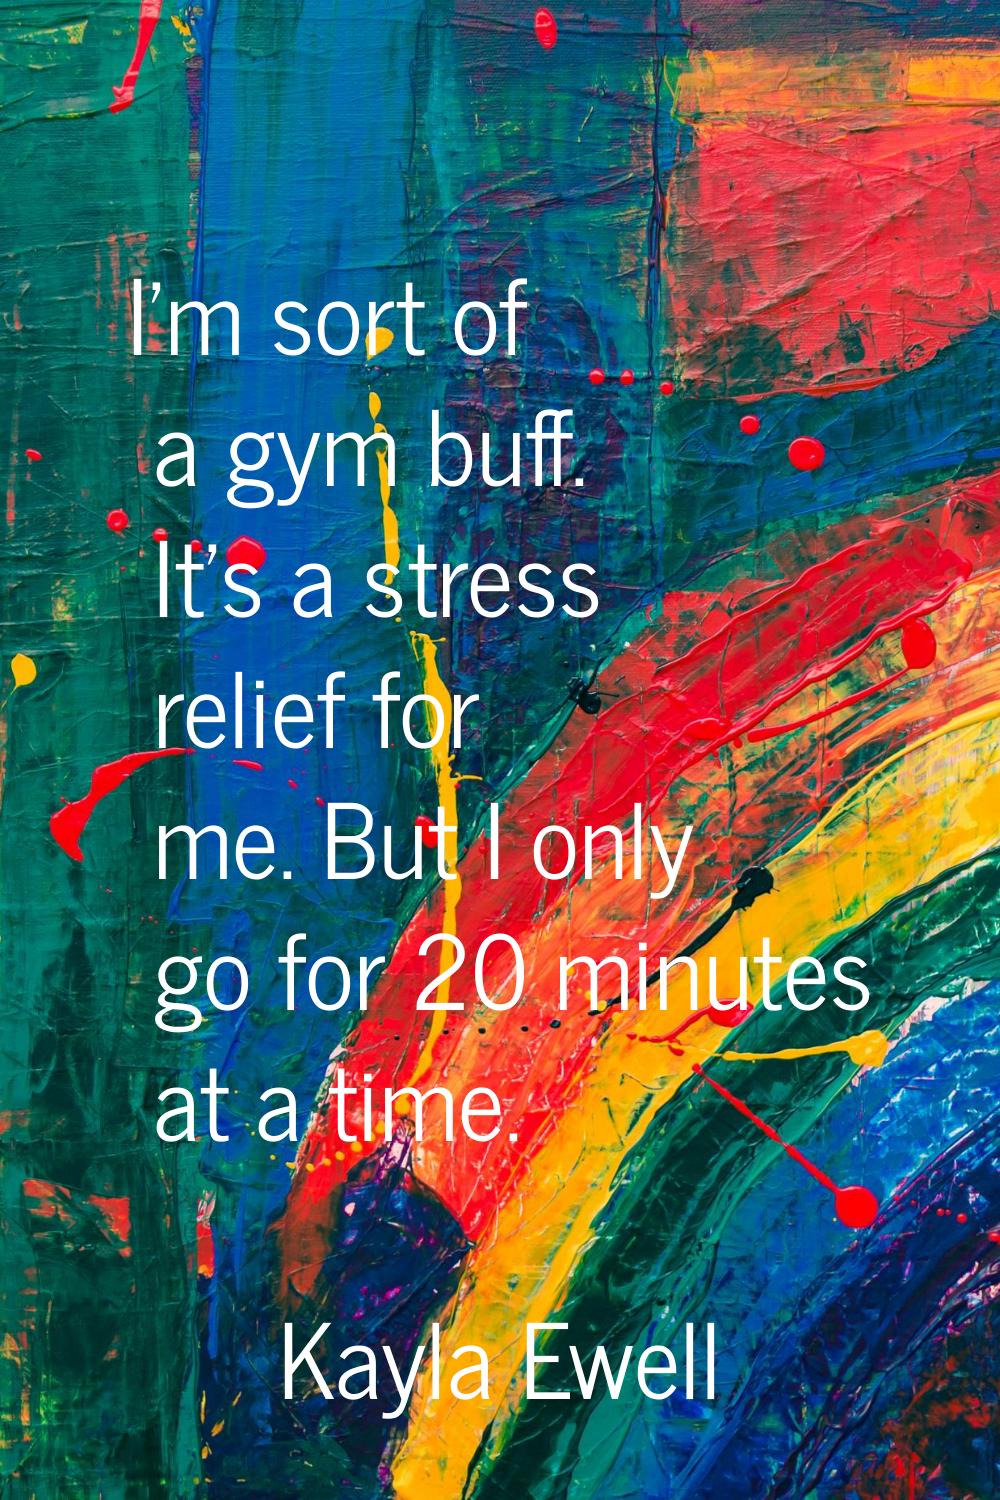 I'm sort of a gym buff. It's a stress relief for me. But I only go for 20 minutes at a time.